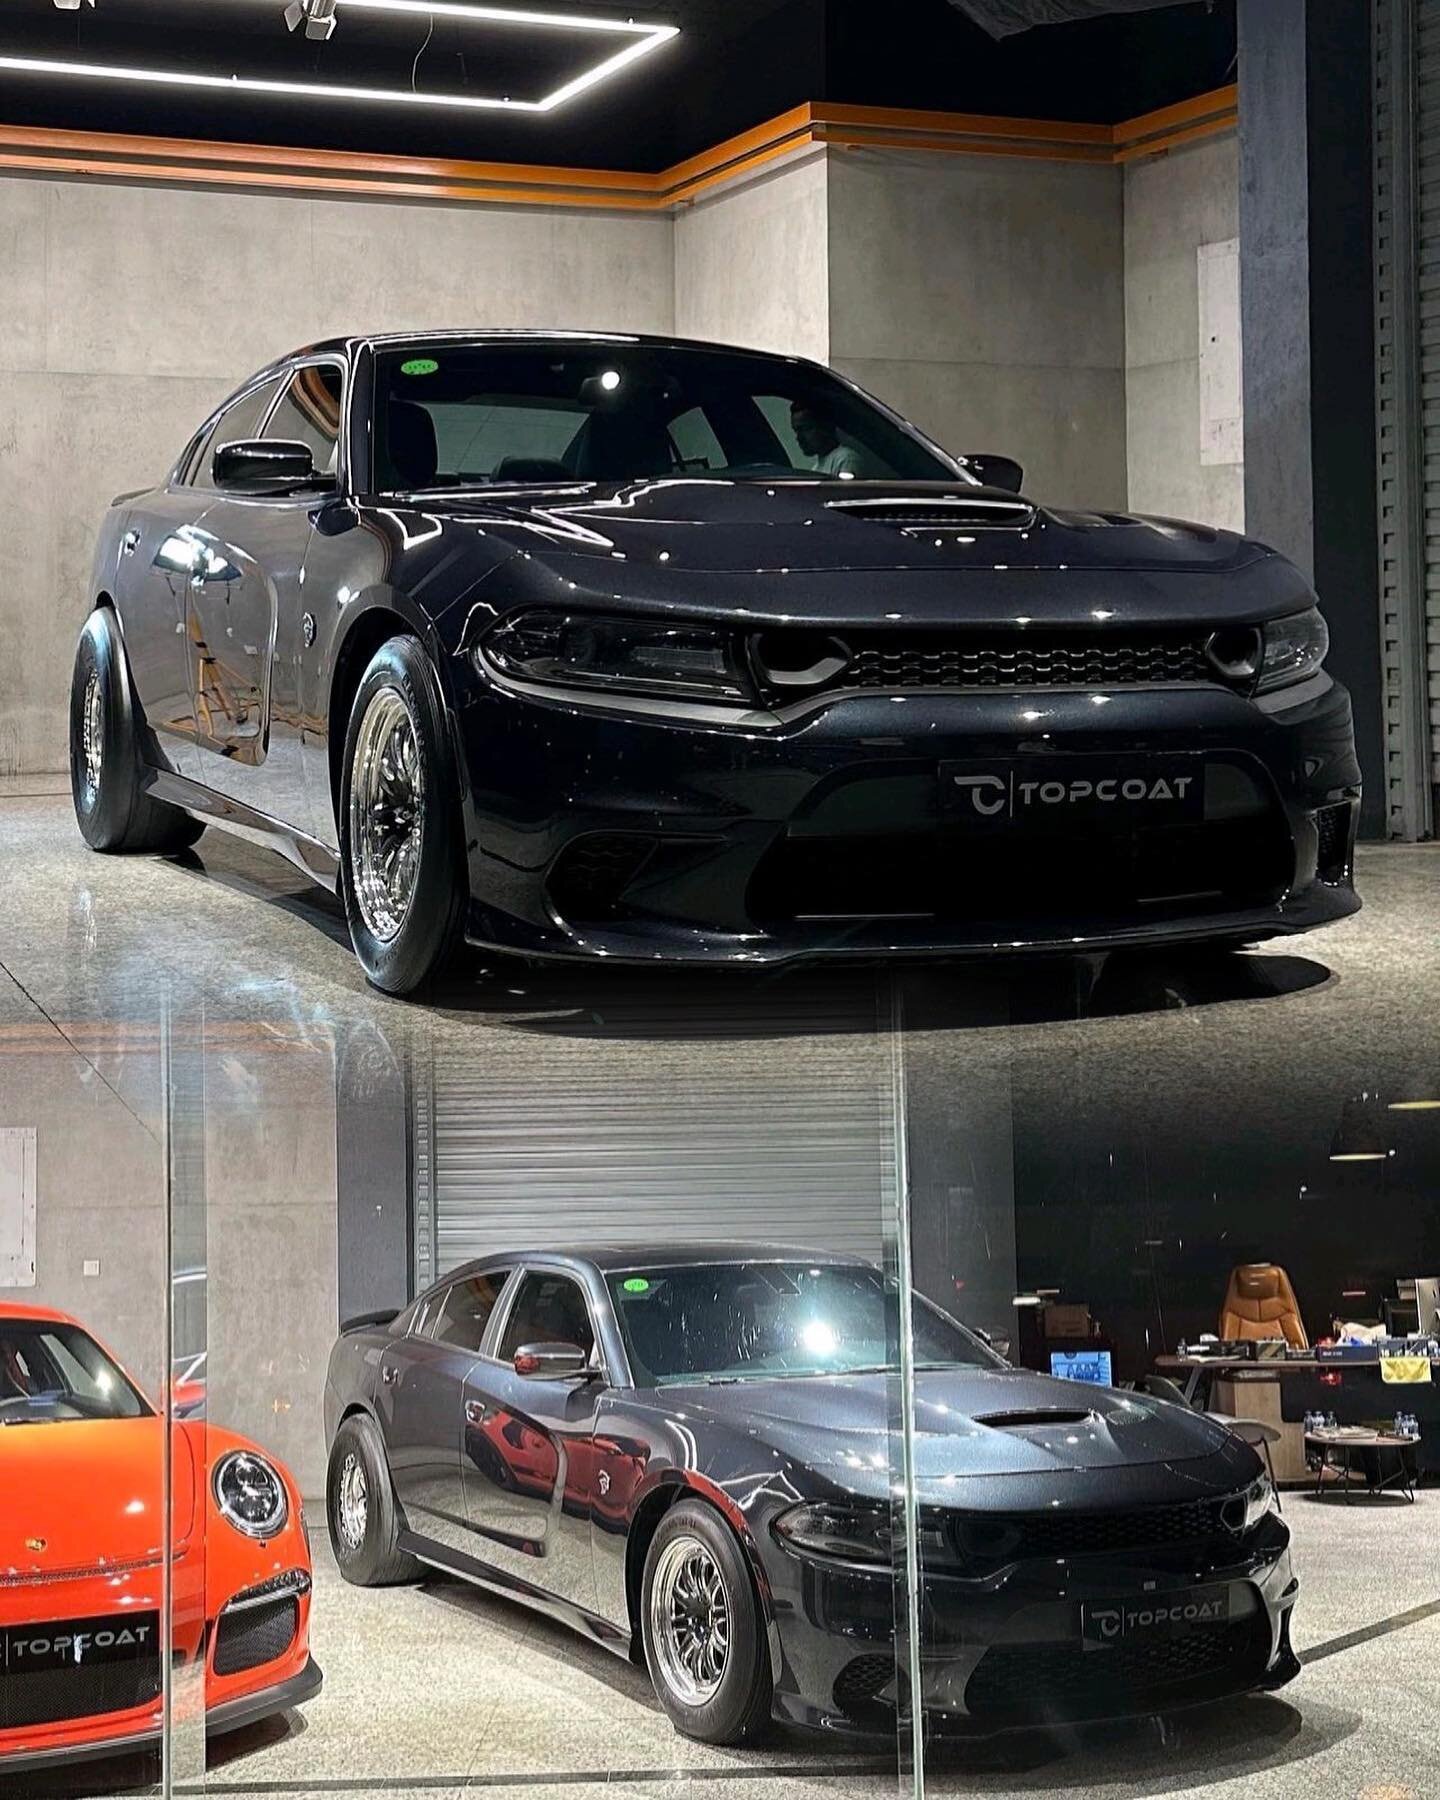 Pure Stage 2 Transmission in one of the one of the Fastest Hellcats in the Middle East 😮&zwj;💨🔥💪
@godfather_427 

#puredrivetrainsolutions #PDS #madeintheusa🇺🇸 #transmission #drivetrain #twinturbo #turbo #boost #v8 #racecar #usa #hellcat #srt #